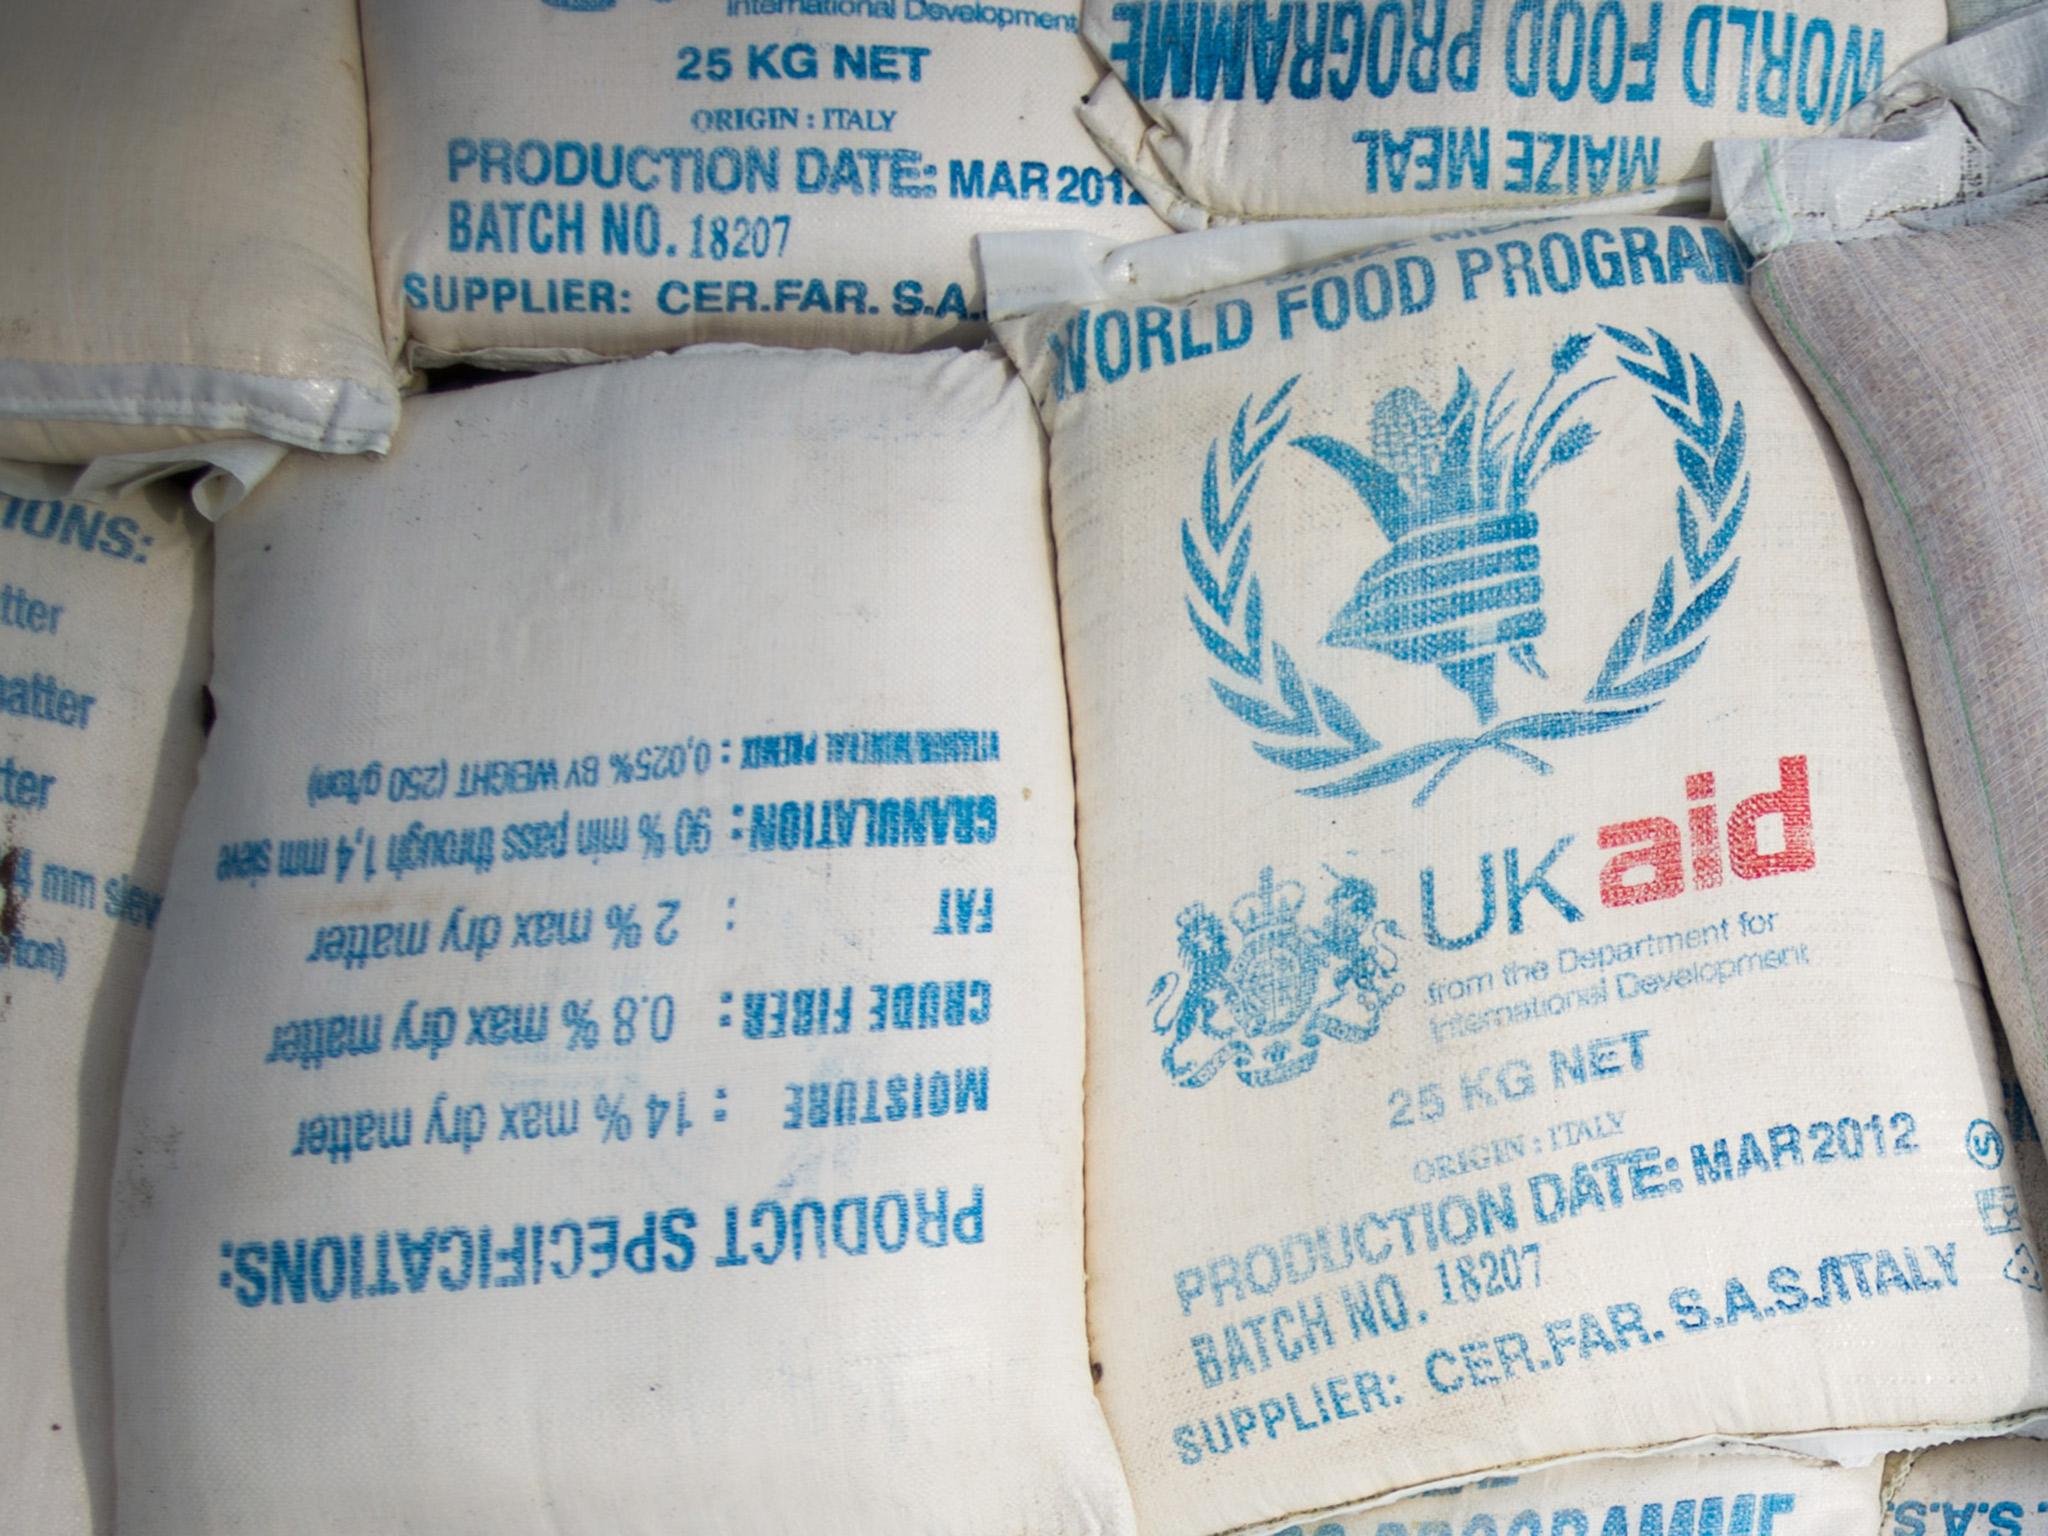 The UK has helped millions to access vital food in the past year